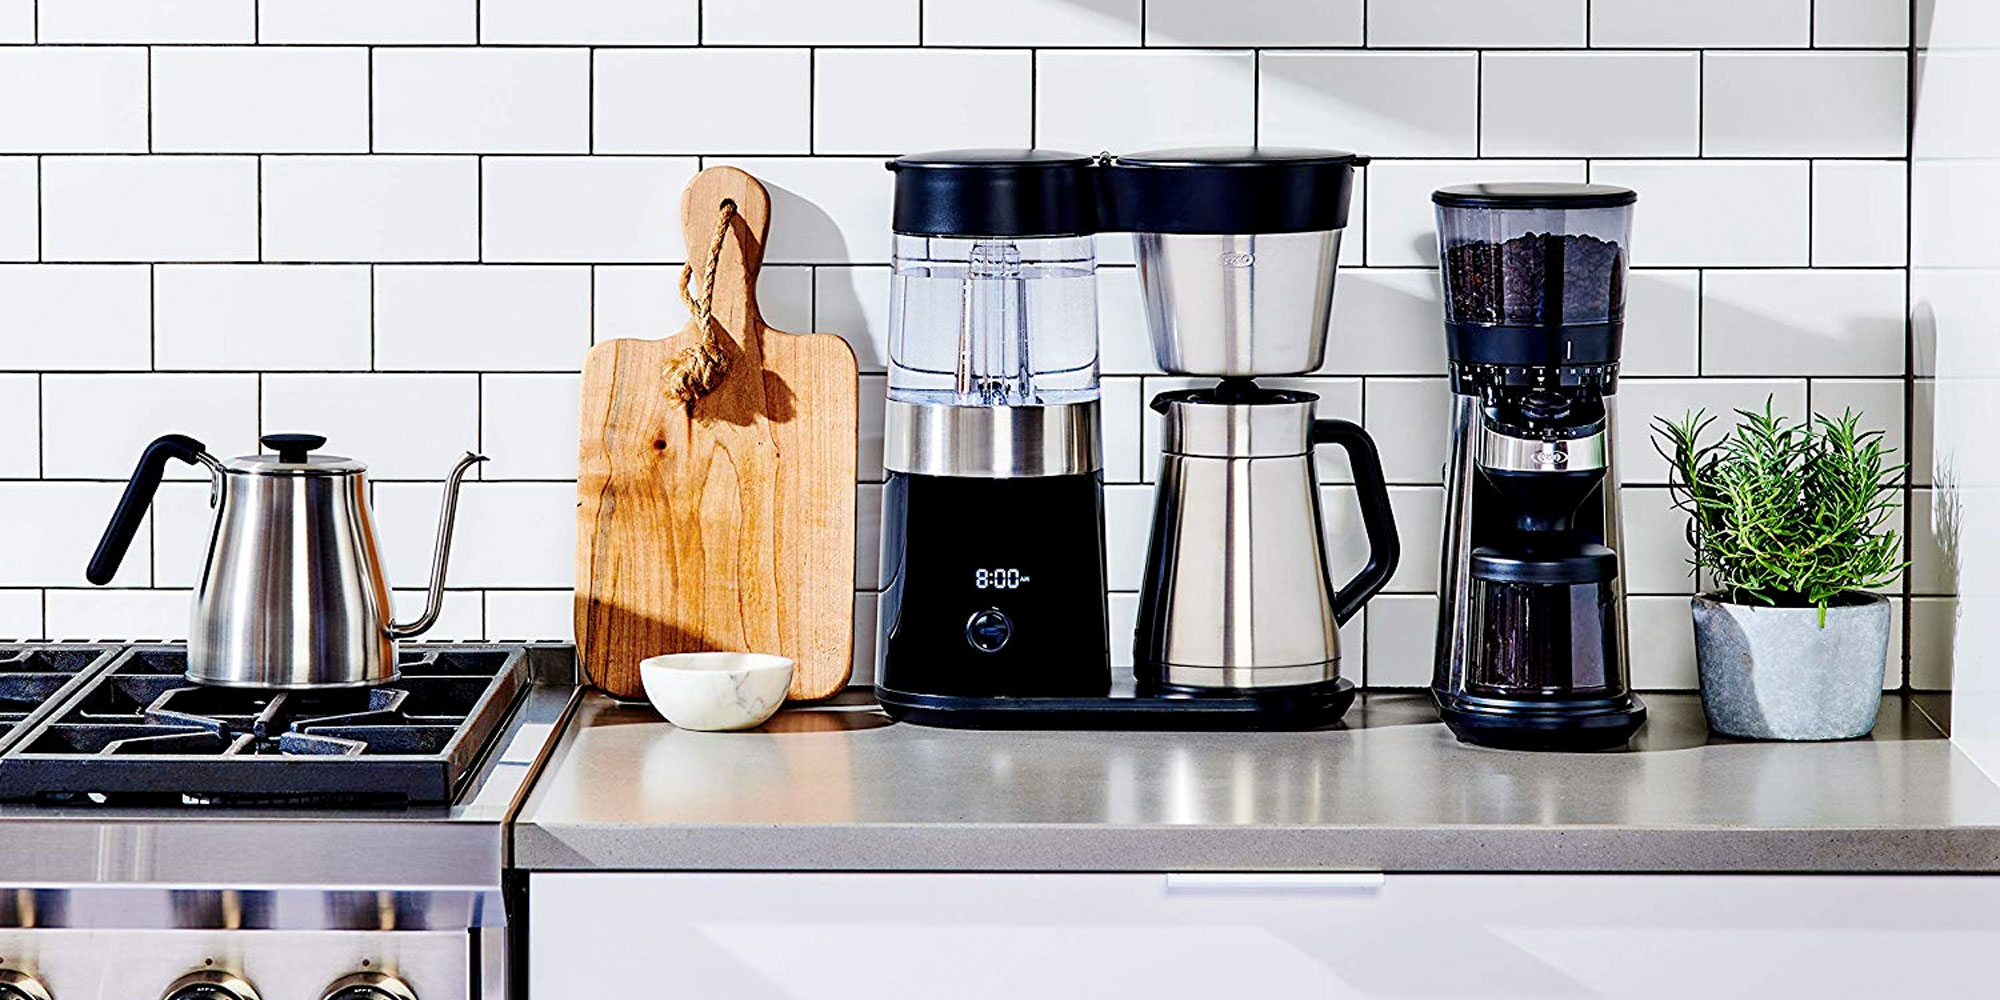 OXO's high-end Brew 9-cup coffee maker hits 2020 low at $127.50 (Reg. $200)